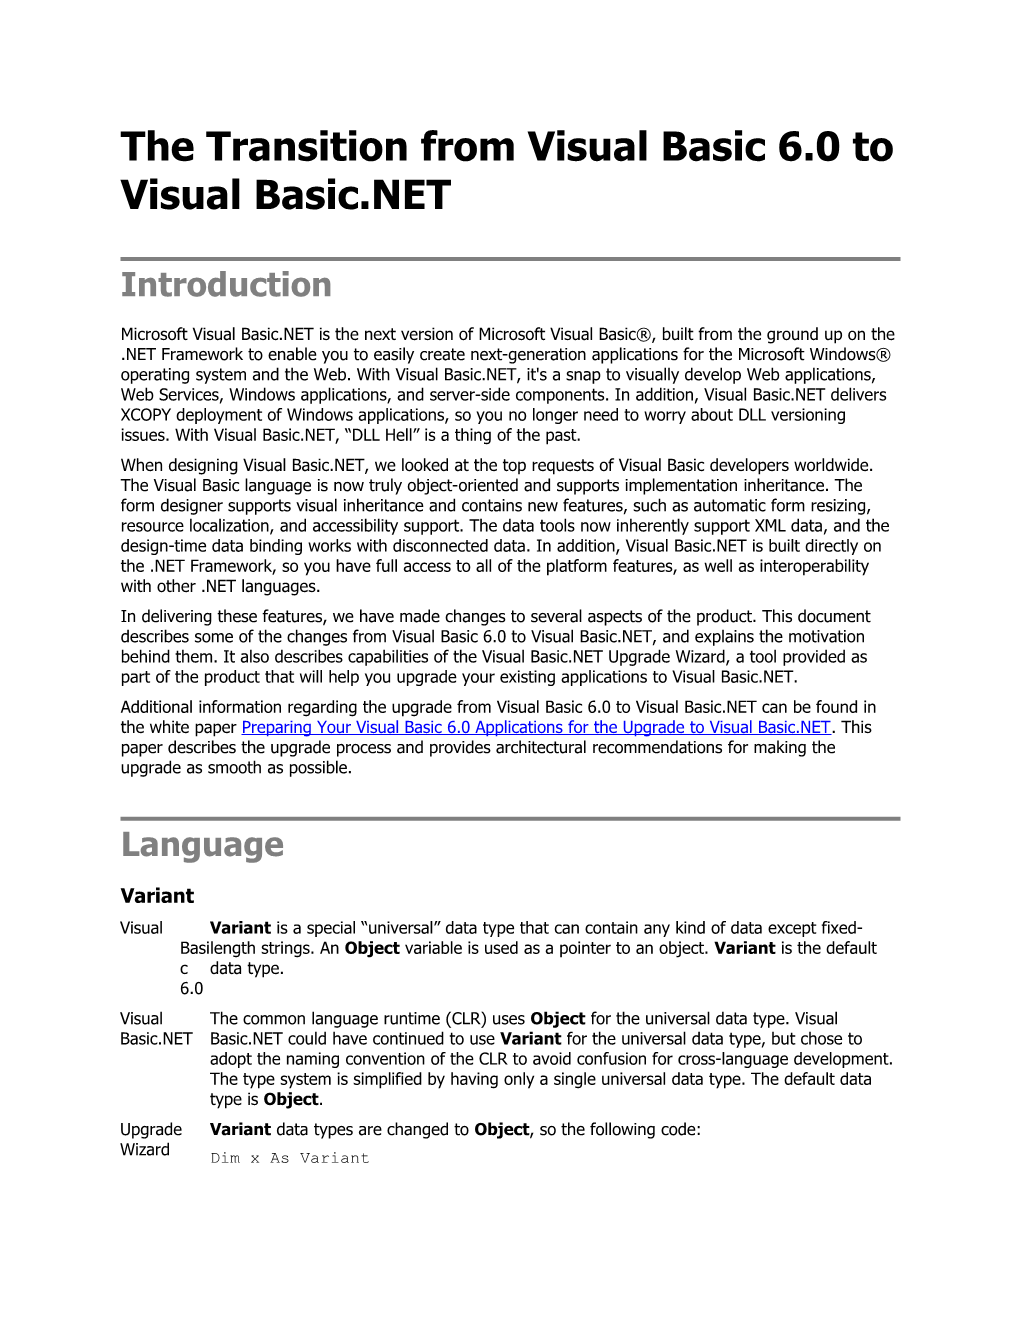 The Transition from Visual Basic 6.0 to Visual Basic.NET